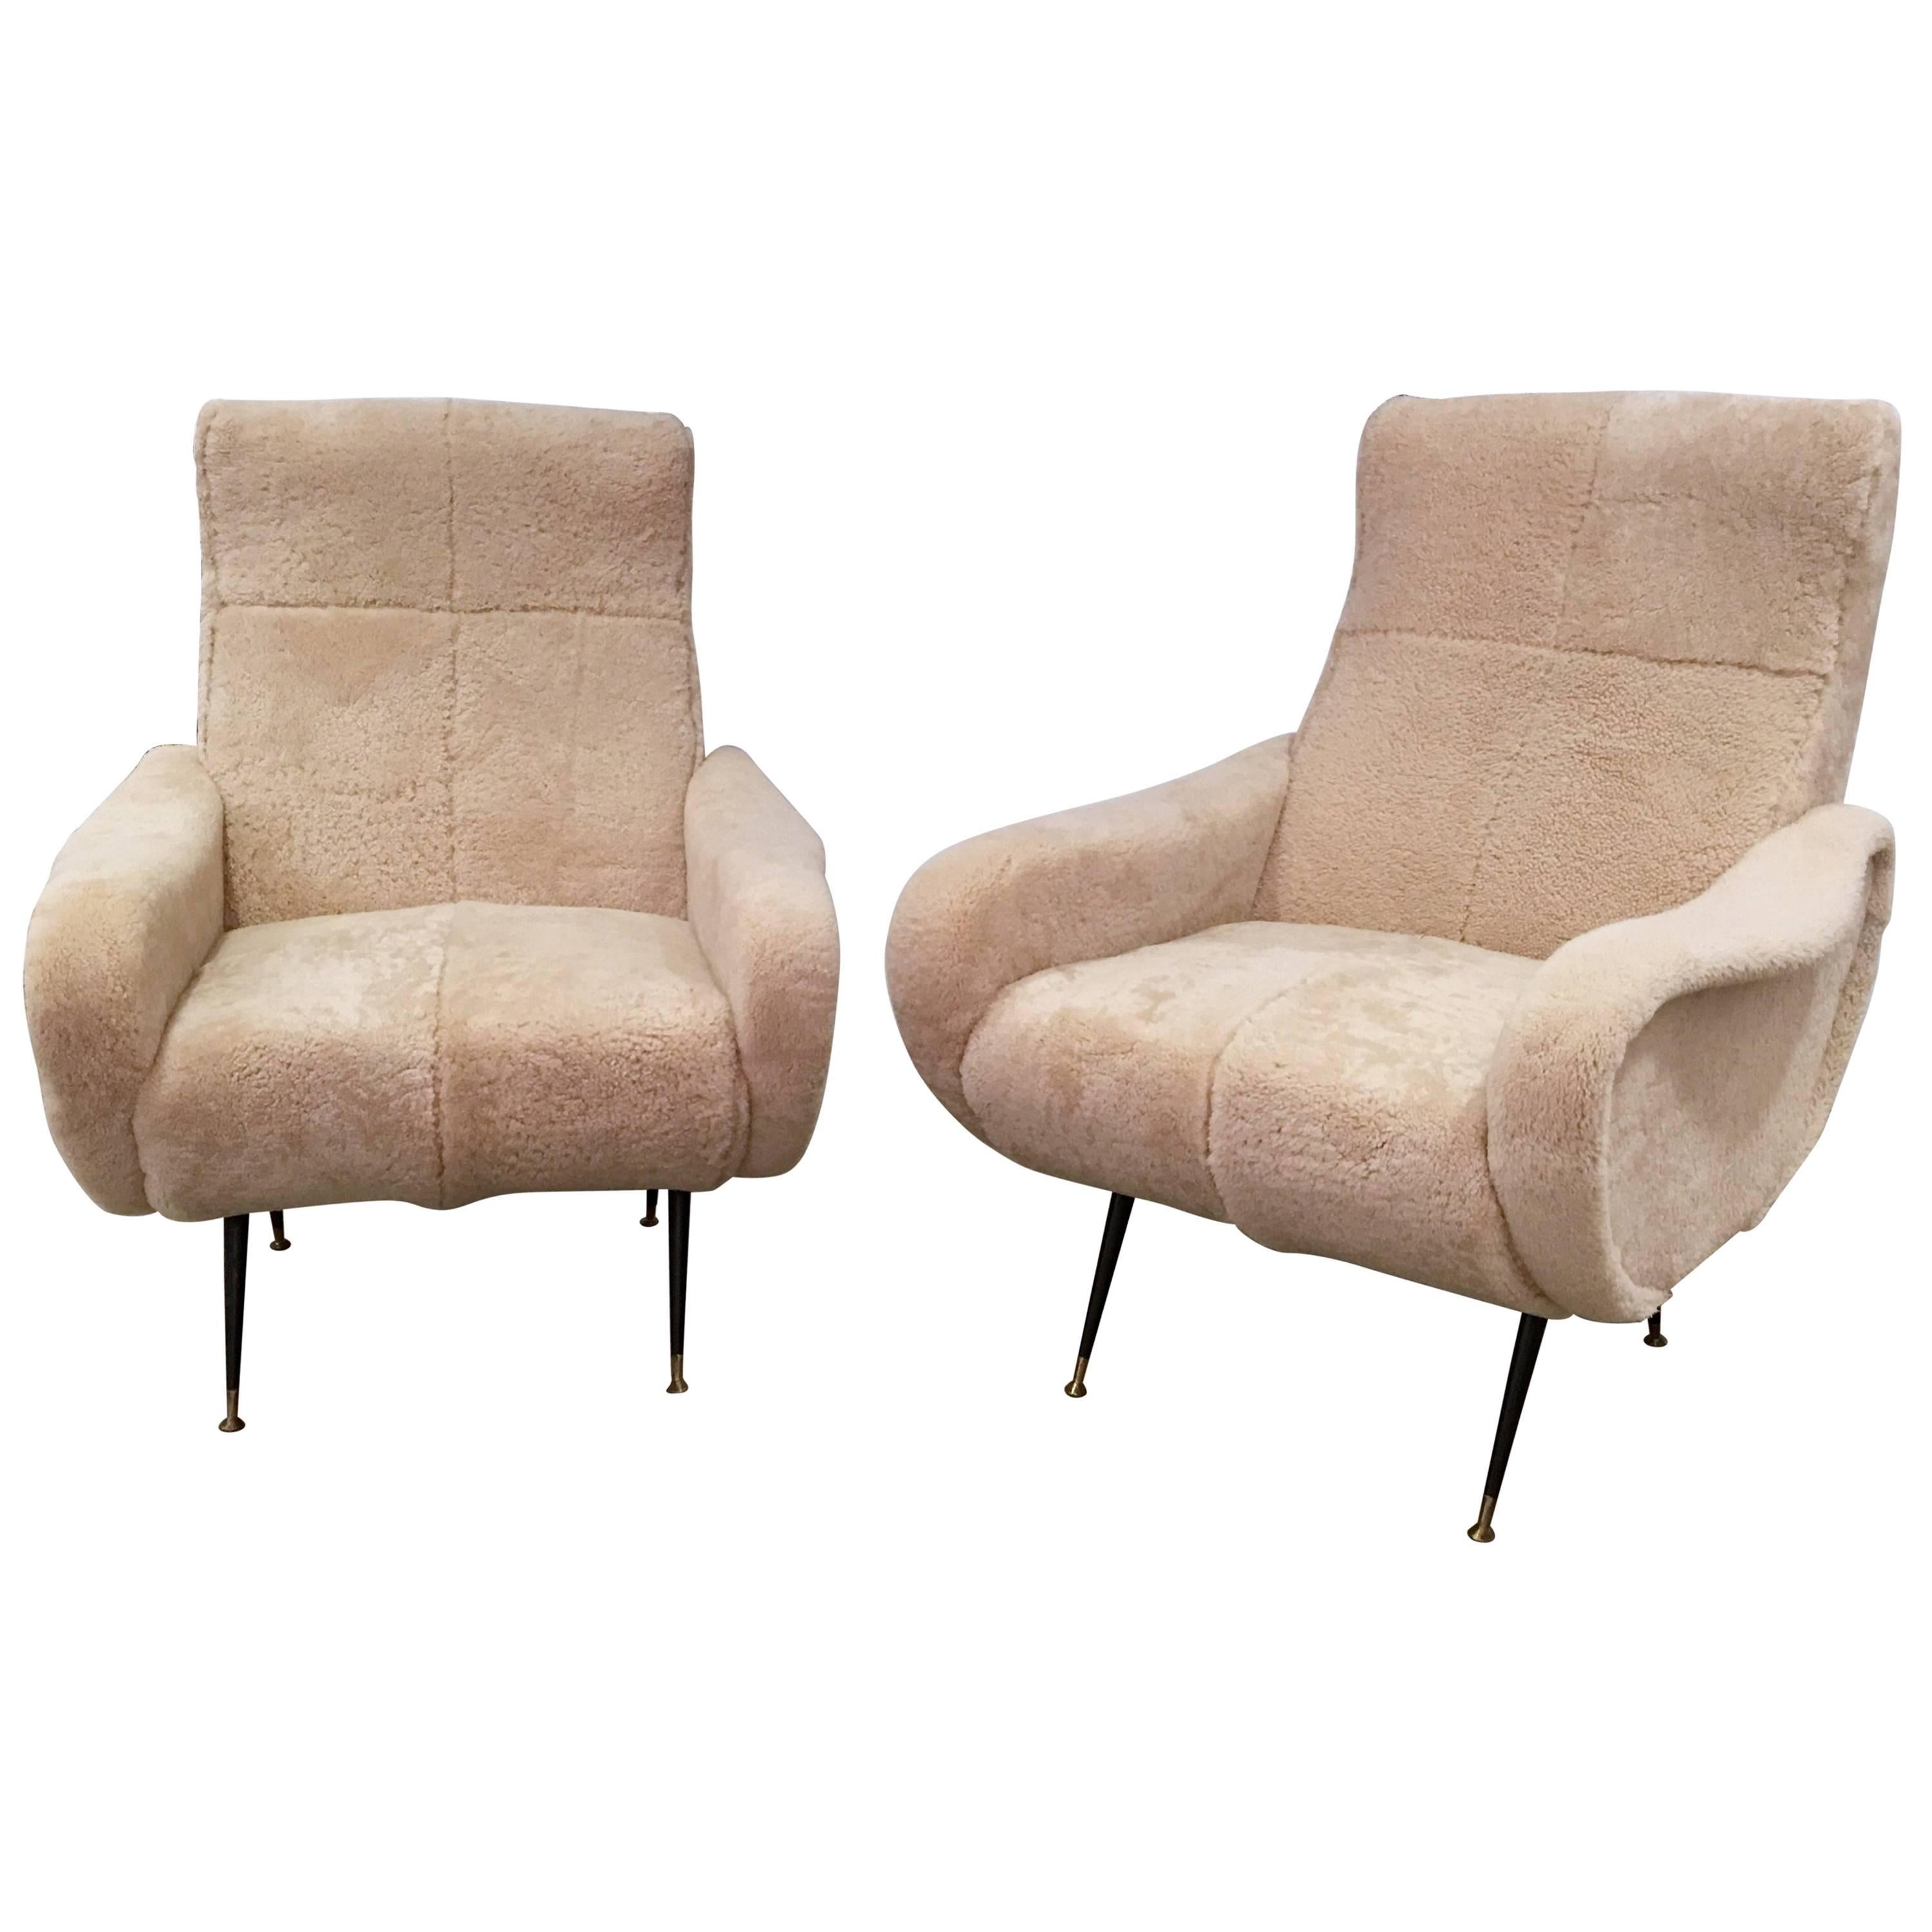 Pair of Mid-Century Italian Chairs, Shearling and Black Metal, circa 1950s